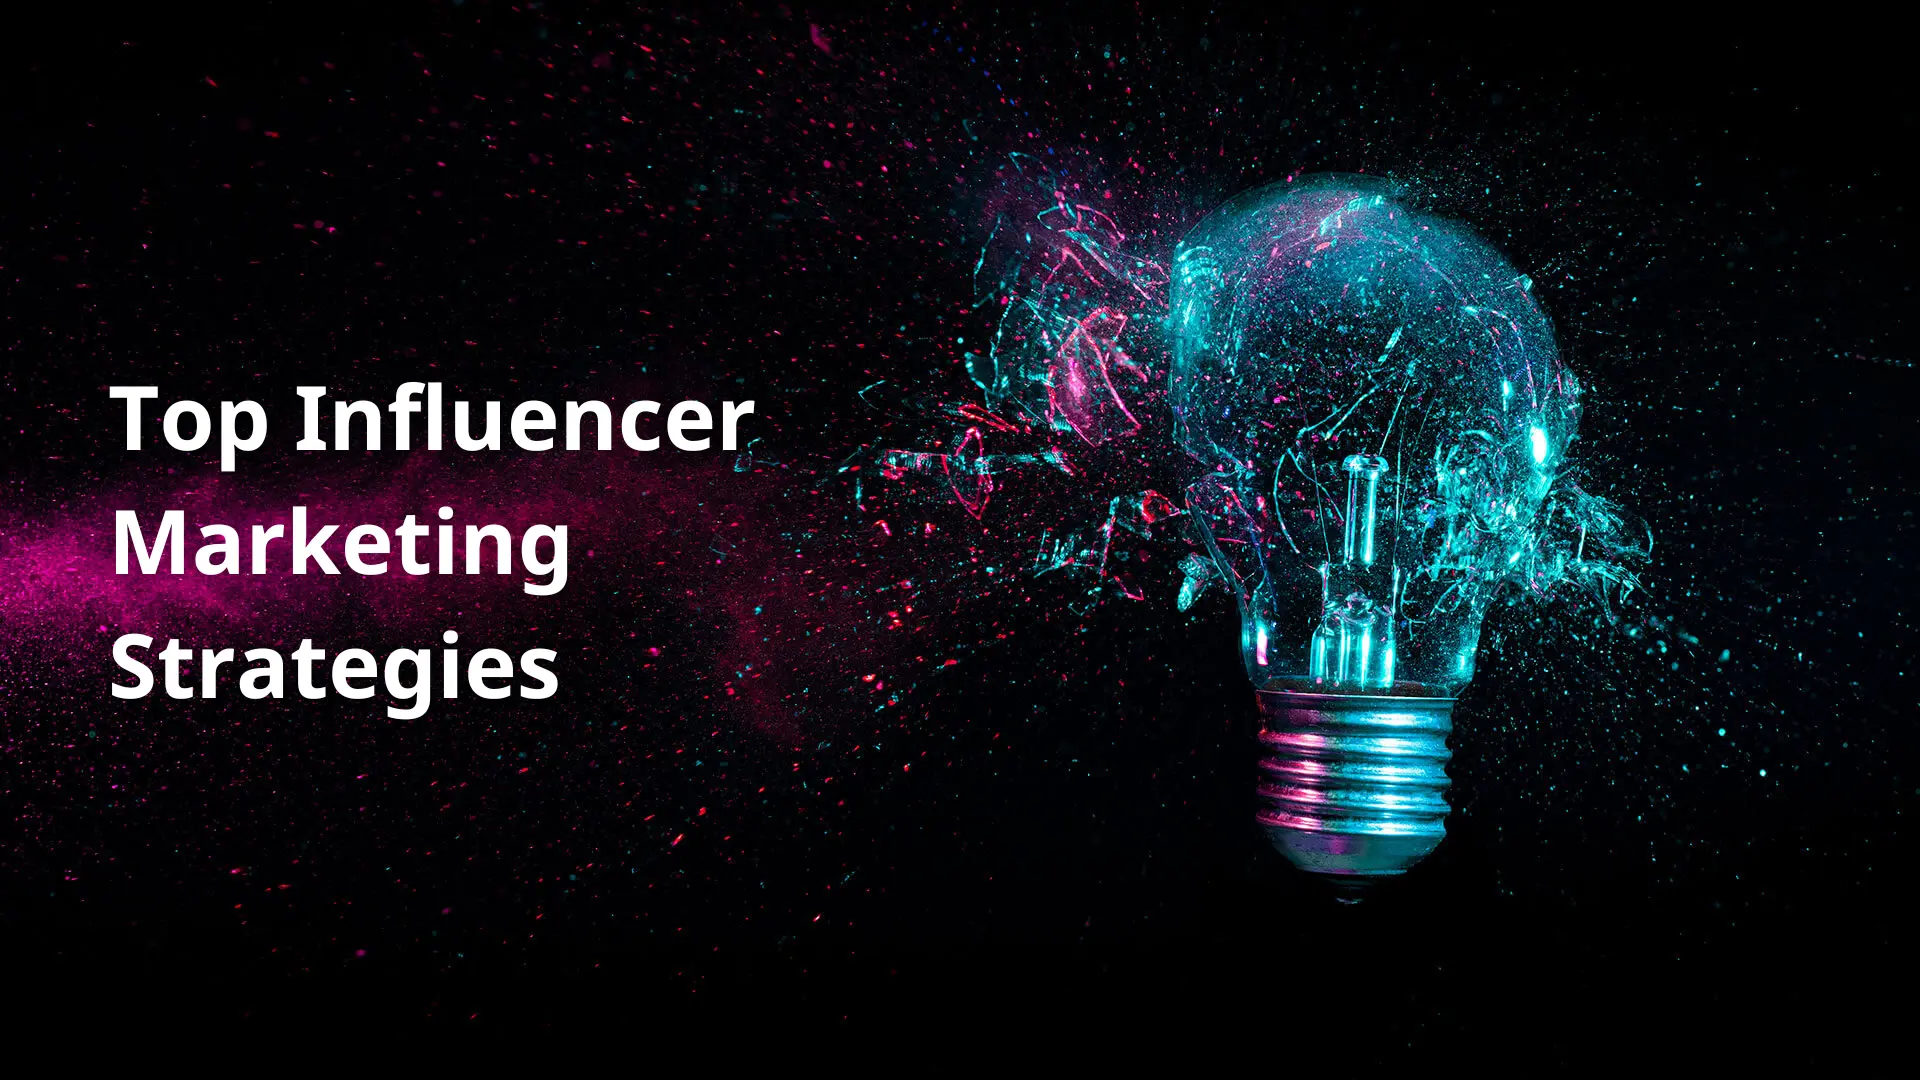 Top influencer marketing techniques